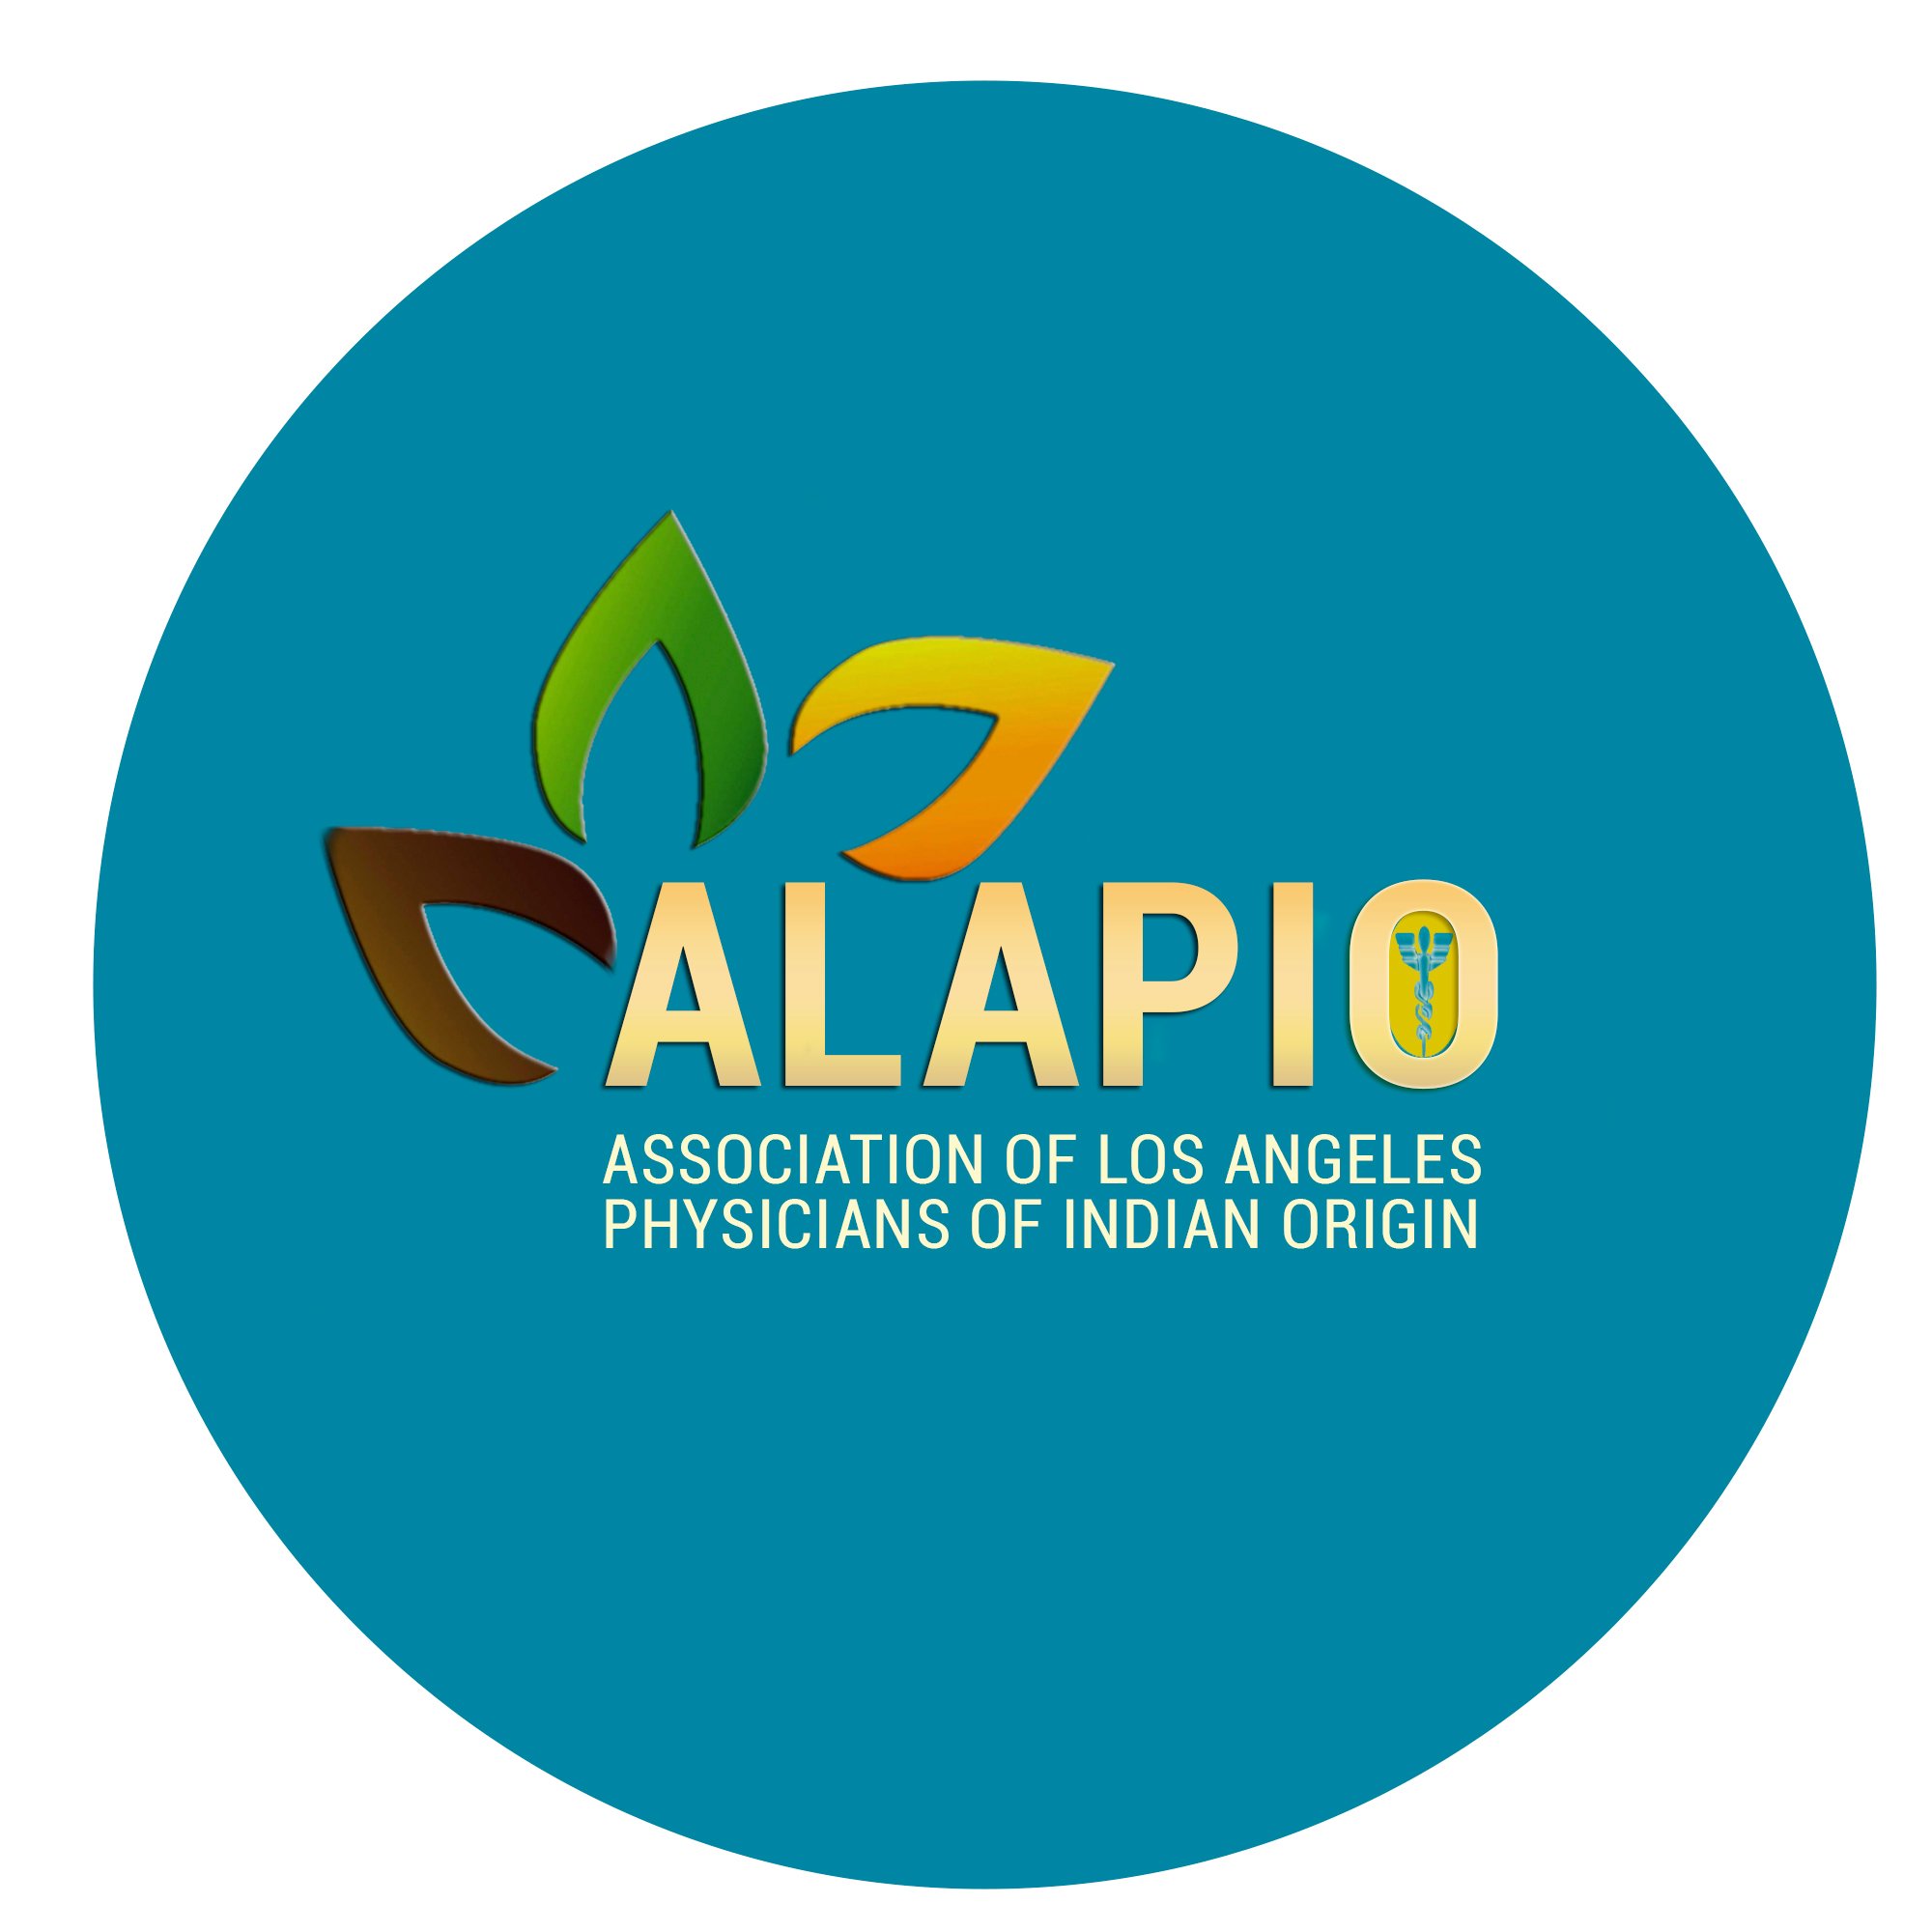 ALAPIO is a non-profit organization founded in 2013. ALAPIO aims to provide health and well-being for all, particularly those who cannot afford it.